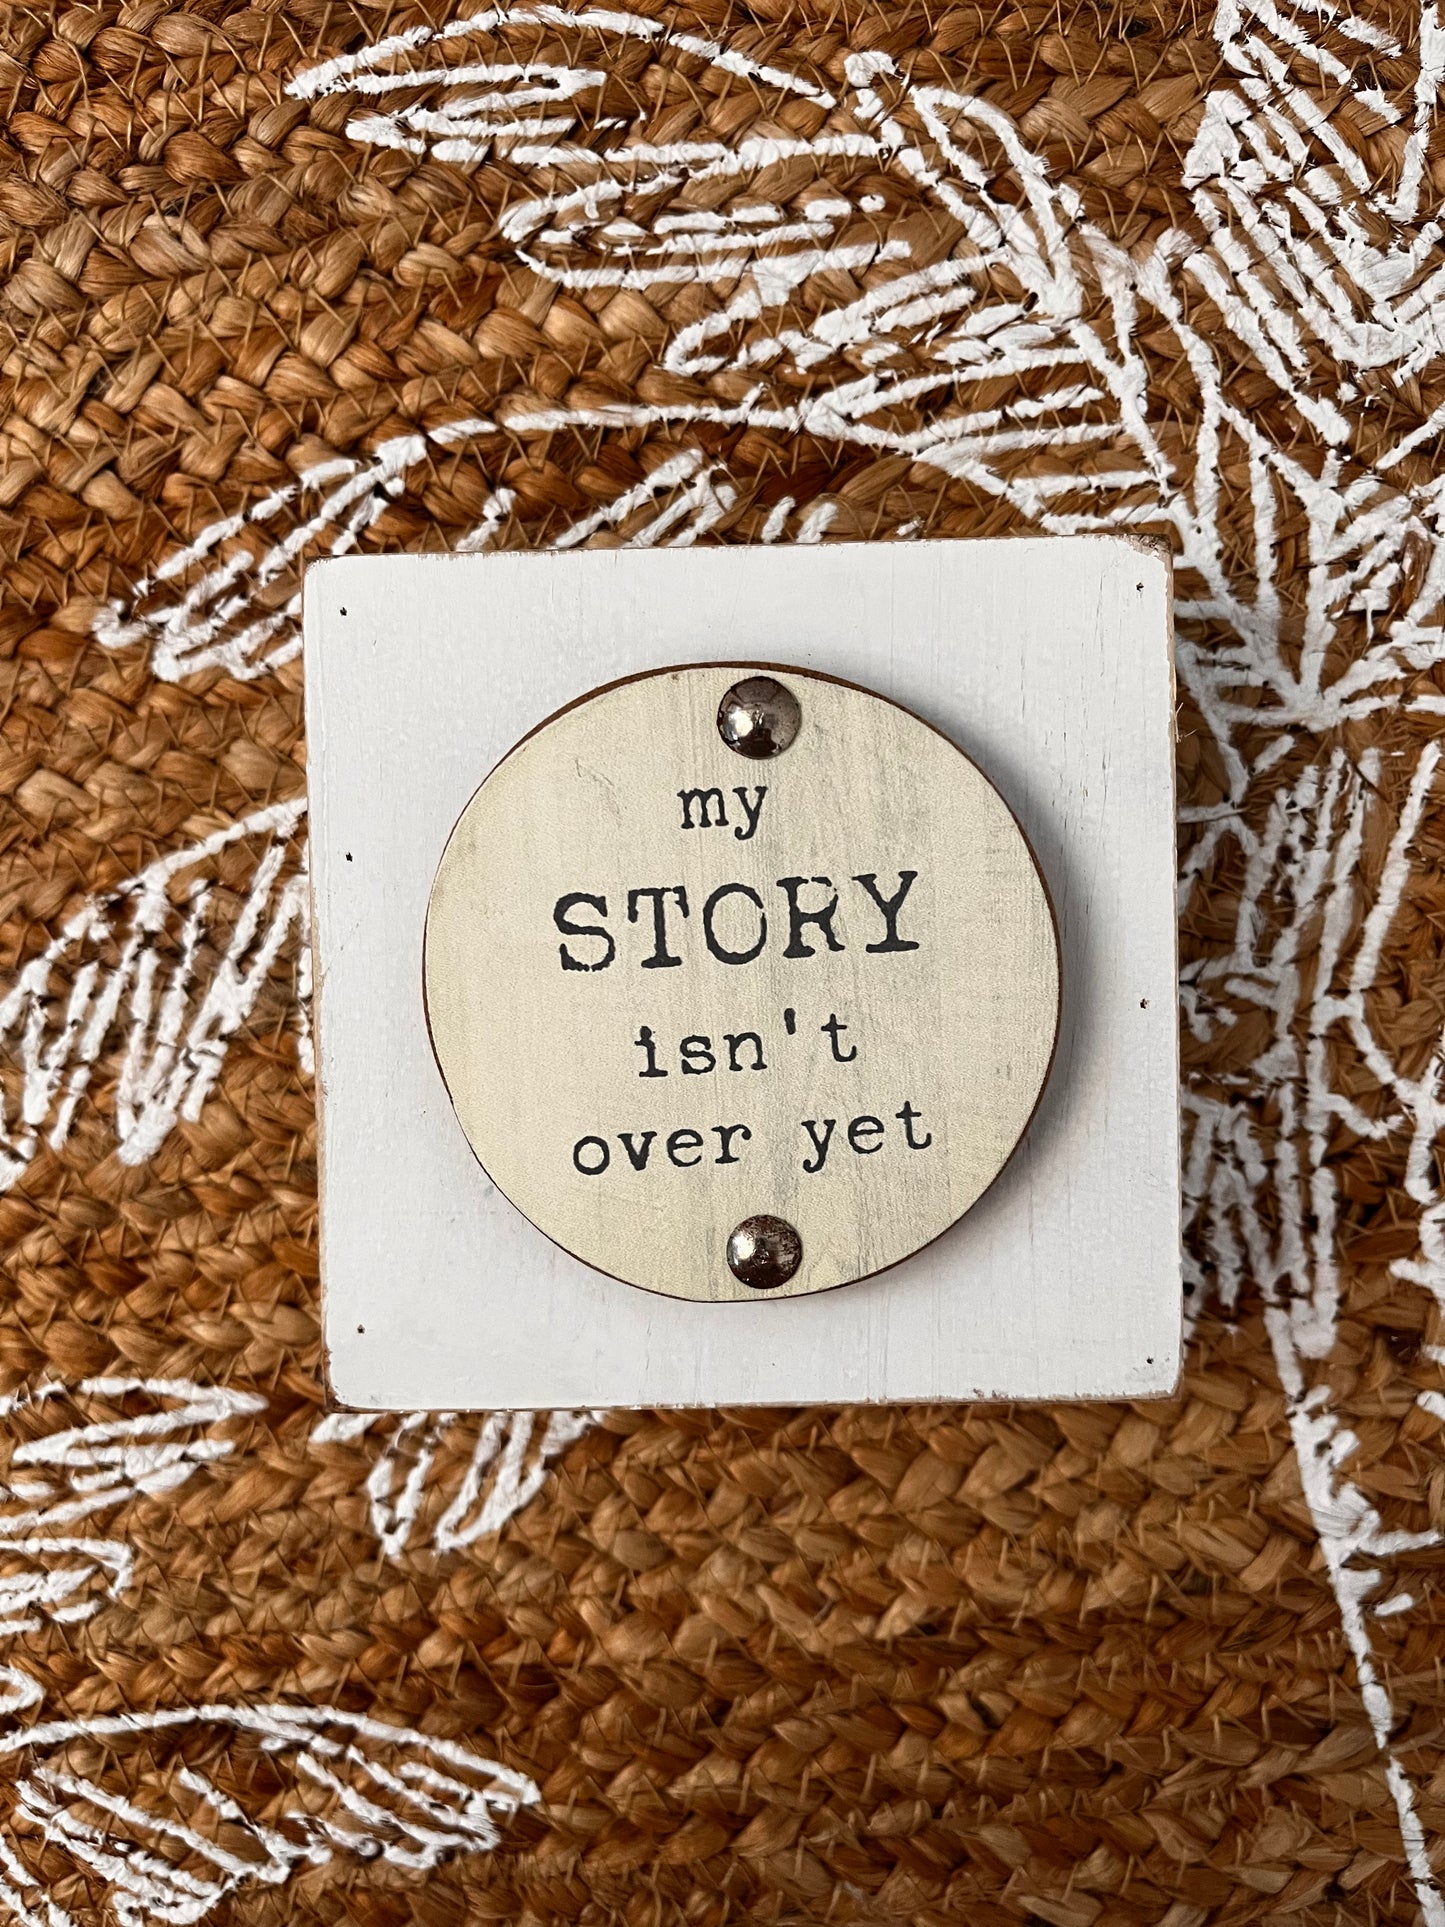 My story isn’t over yet sign